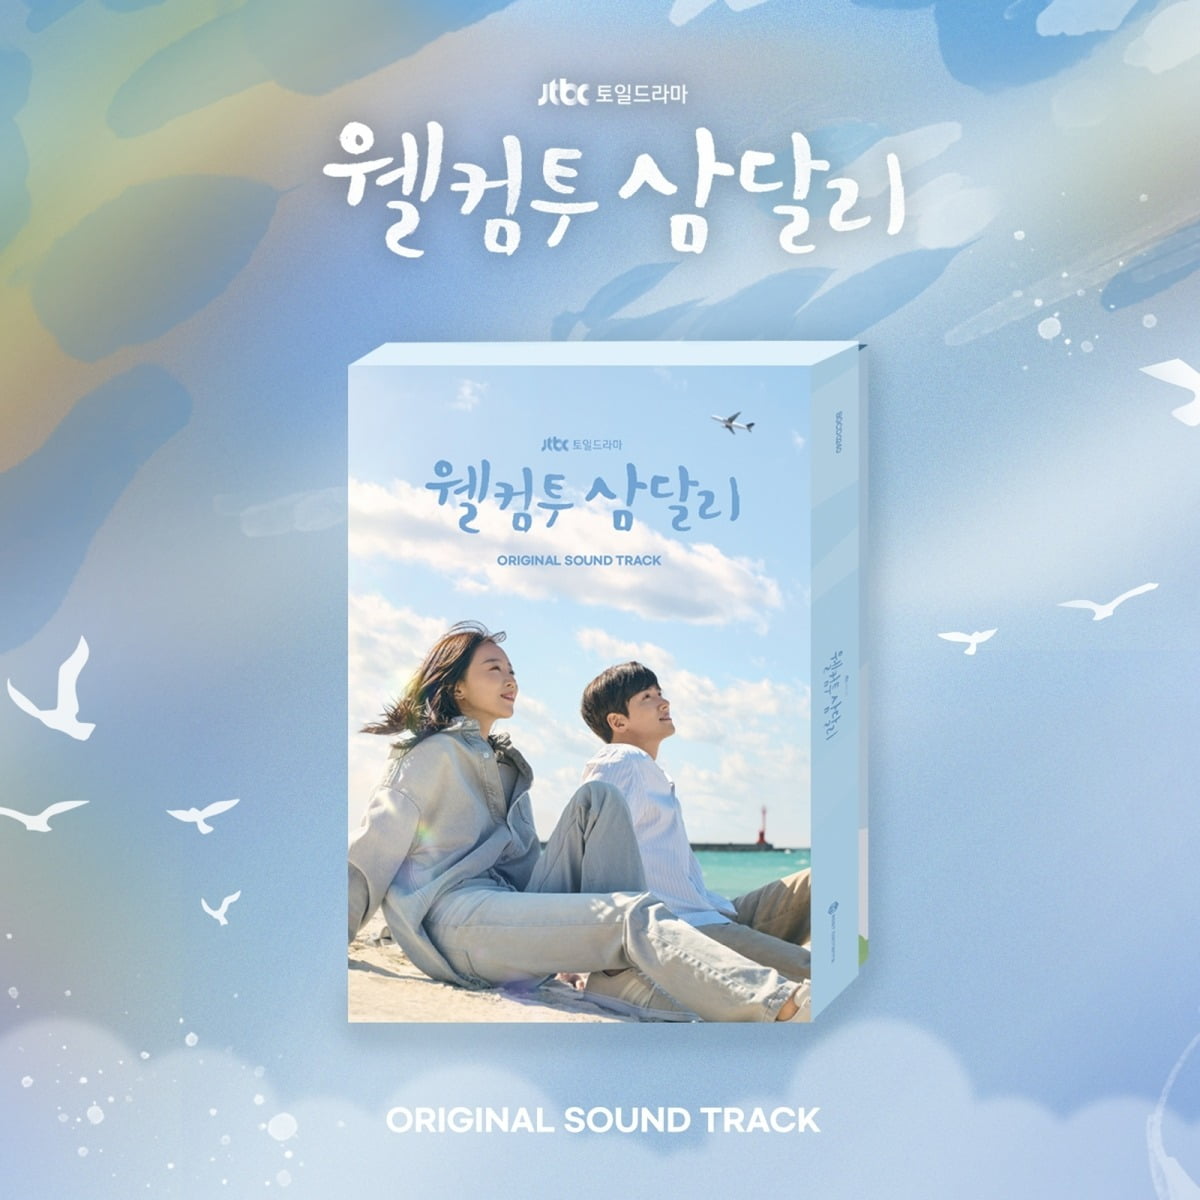 Pre-orders for 'Welcome to Samdali' OST special album have begun